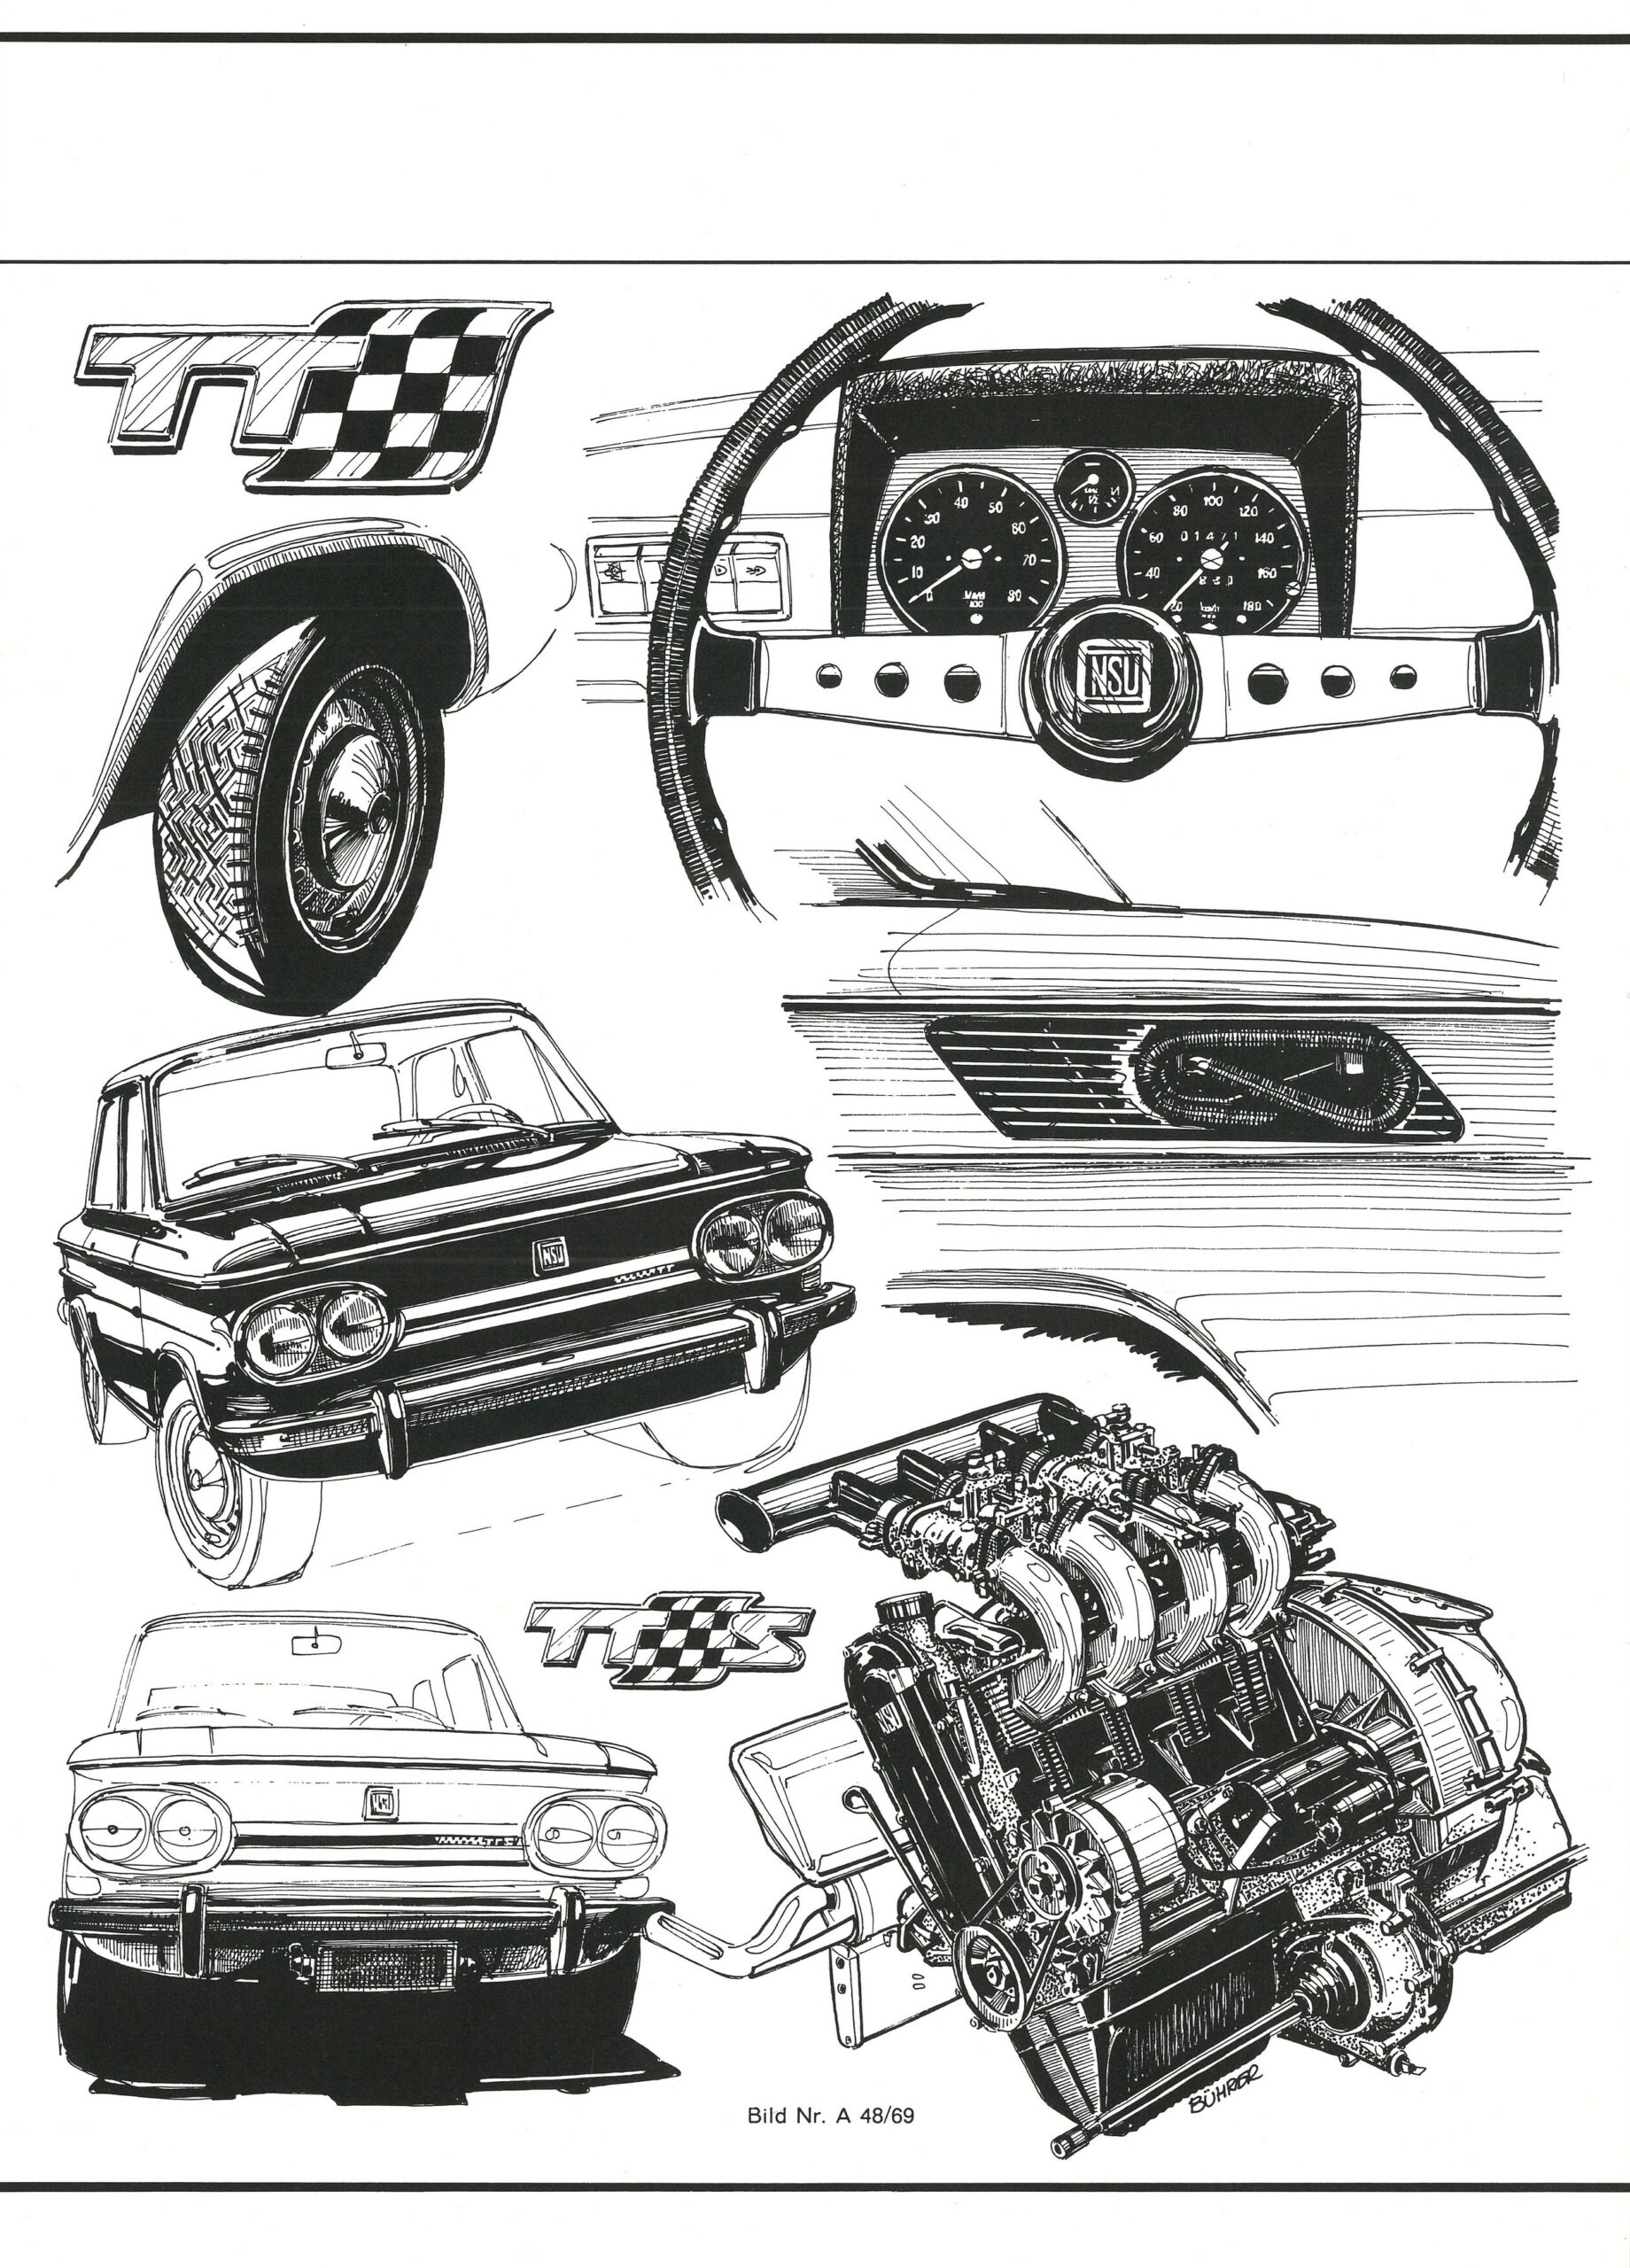 A drawing with details of NSU TT and NSU TTS.